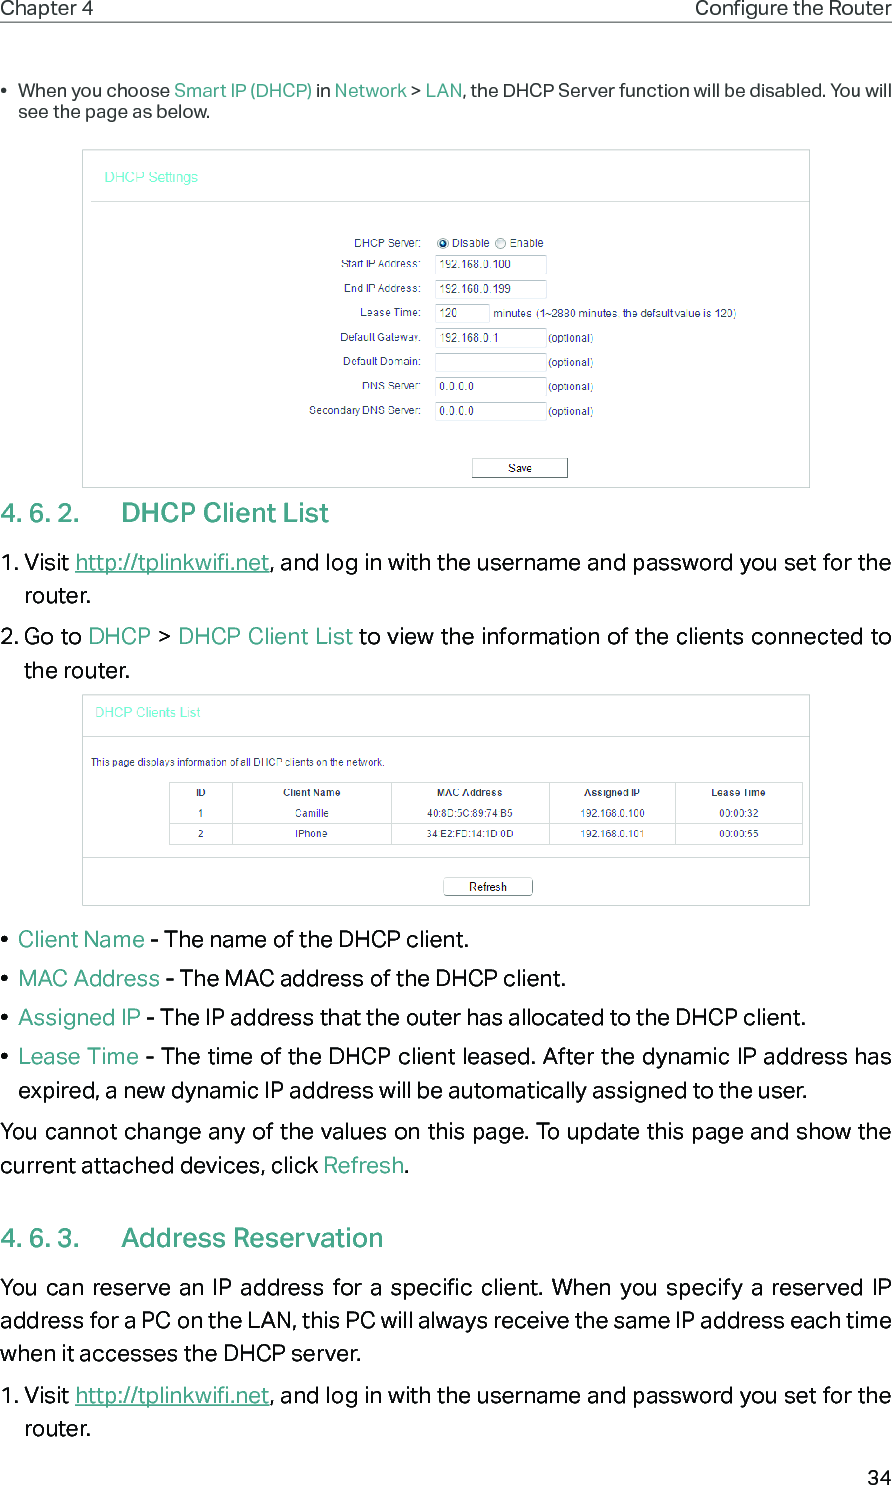 34Chapter 4 Congure the Router •  When you choose Smart IP (DHCP) in Network &gt; LAN, the DHCP Server function will be disabled. You will see the page as below.4. 6. 2.  DHCP Client List1. Visit http://tplinkwifi.net, and log in with the username and password you set for the router.2. Go to DHCP &gt; DHCP Client List to view the information of the clients connected to the router.•  Client Name - The name of the DHCP client.•  MAC Address - The MAC address of the DHCP client. •  Assigned IP - The IP address that the outer has allocated to the DHCP client.•  Lease Time - The time of the DHCP client leased. After the dynamic IP address has expired, a new dynamic IP address will be automatically assigned to the user.  You cannot change any of the values on this page. To update this page and show the current attached devices, click Refresh.4. 6. 3.  Address ReservationYou can reserve an IP address for a specific client. When you specify a reserved IP address for a PC on the LAN, this PC will always receive the same IP address each time when it accesses the DHCP server.1. Visit http://tplinkwifi.net, and log in with the username and password you set for the router.